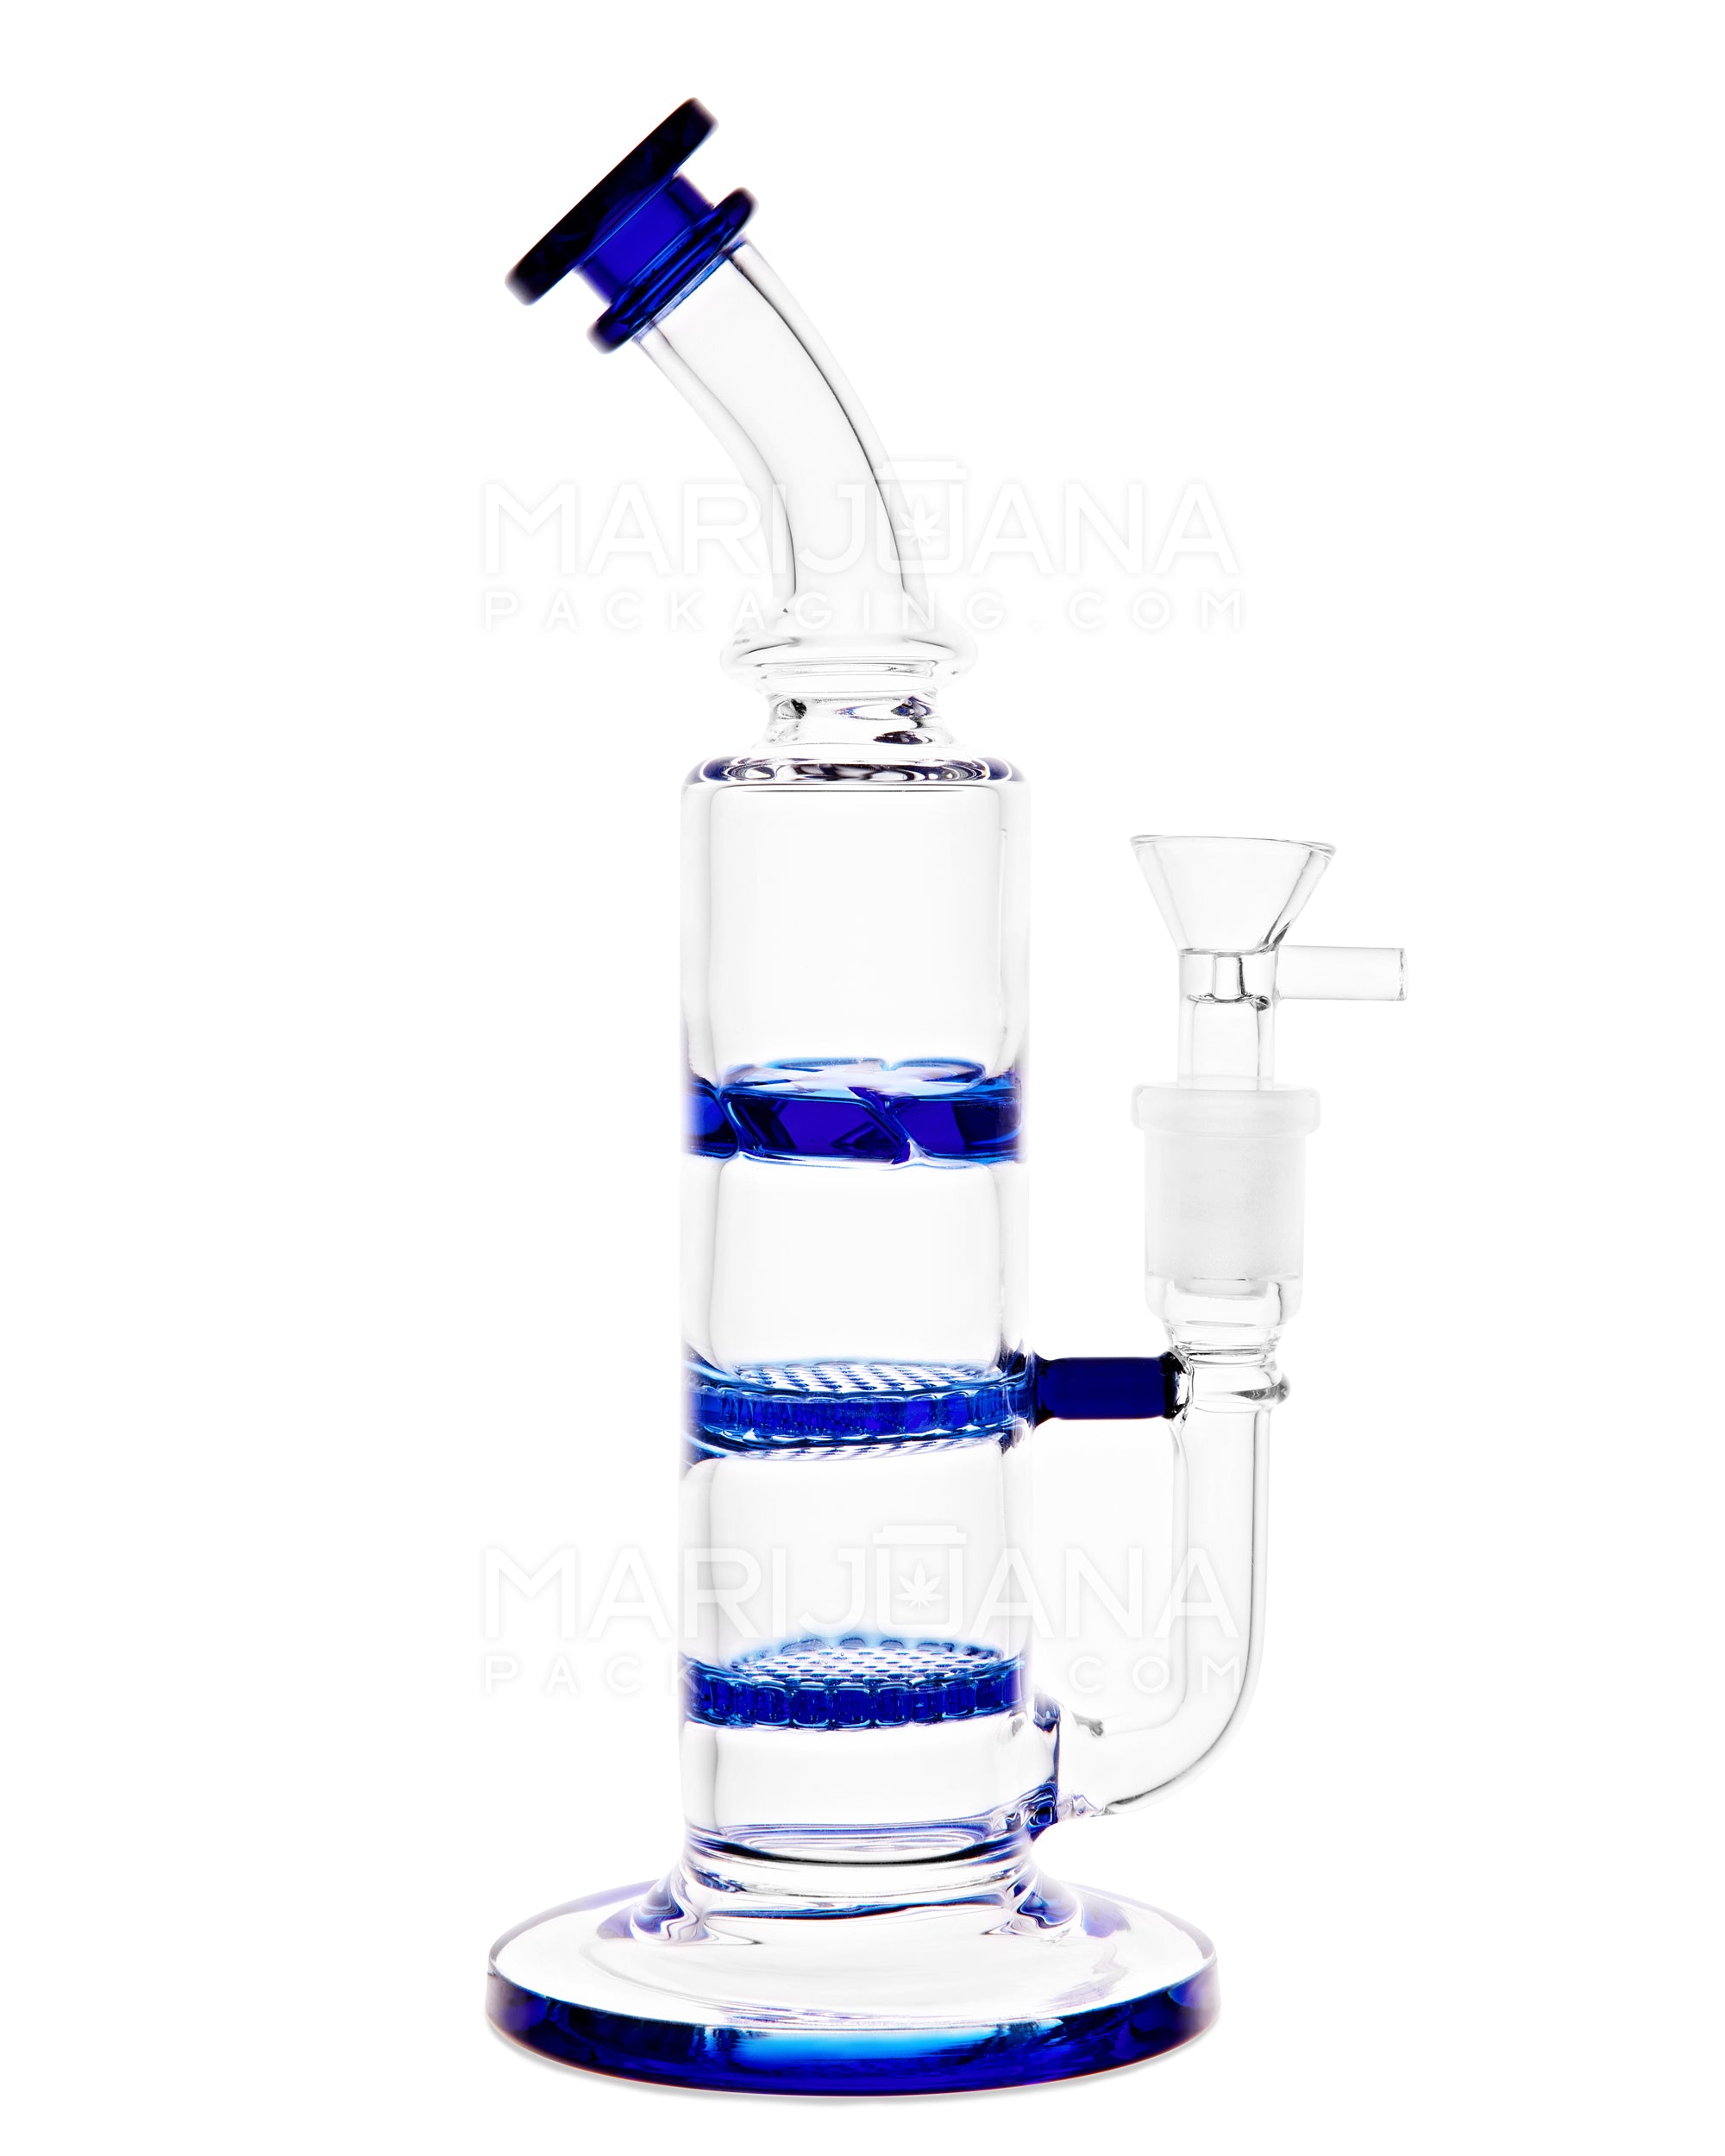 Bent Neck Triple Honeycomb Perc Glass Water Pipe w/ Thick Base | 9.5in Tall - 14mm Bowl - Blue - 1